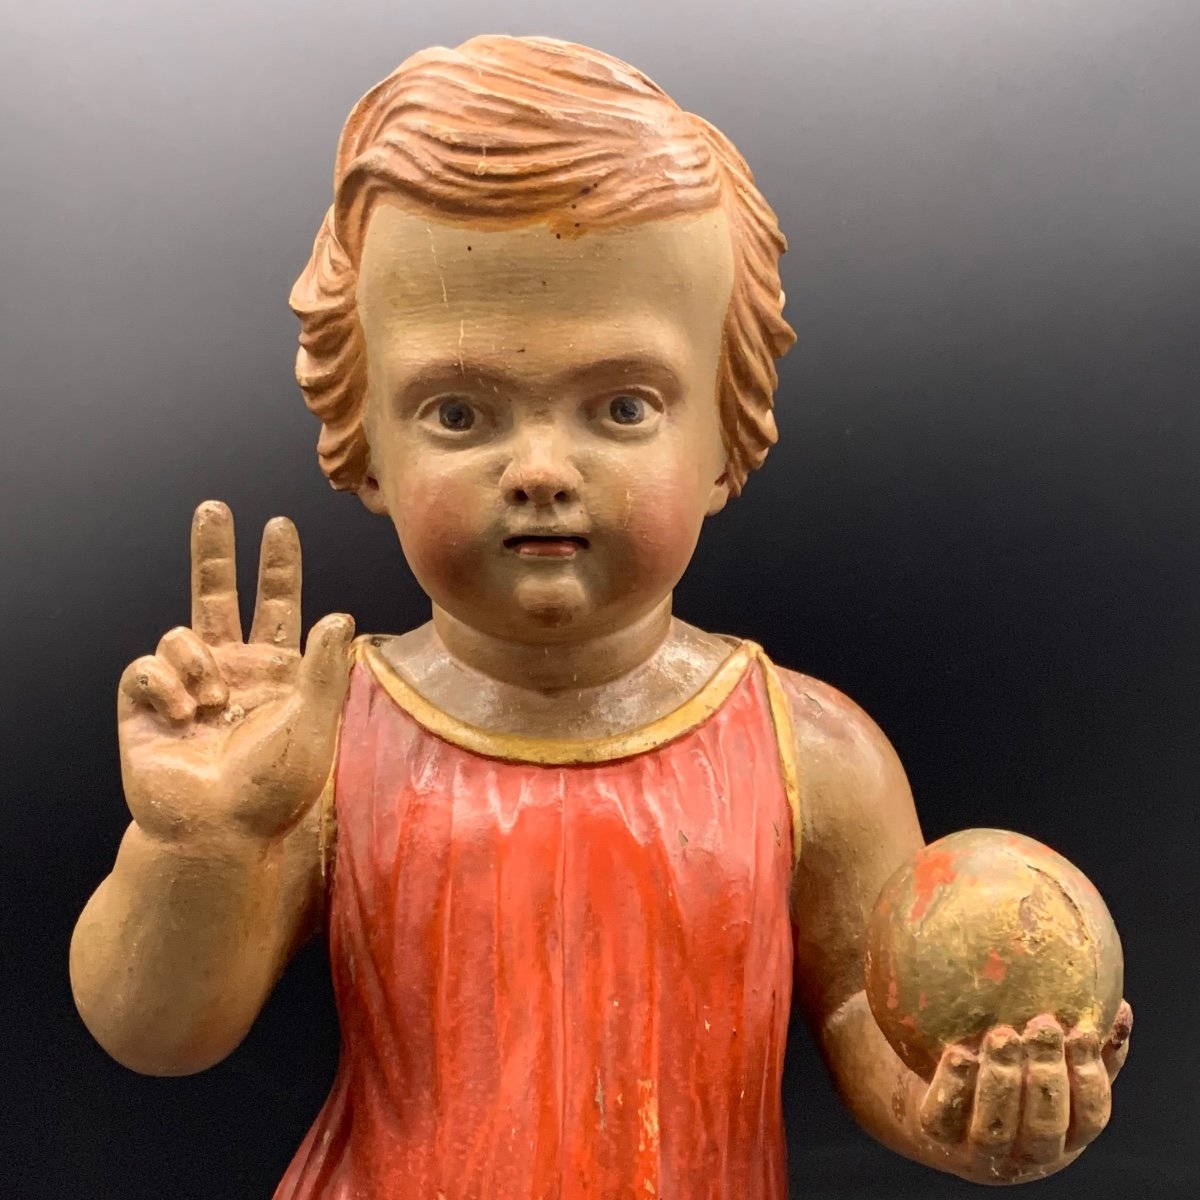 Polychrome Wooden Sculpture Depicting The Blessing Child Jesus- 19th Century-photo-2